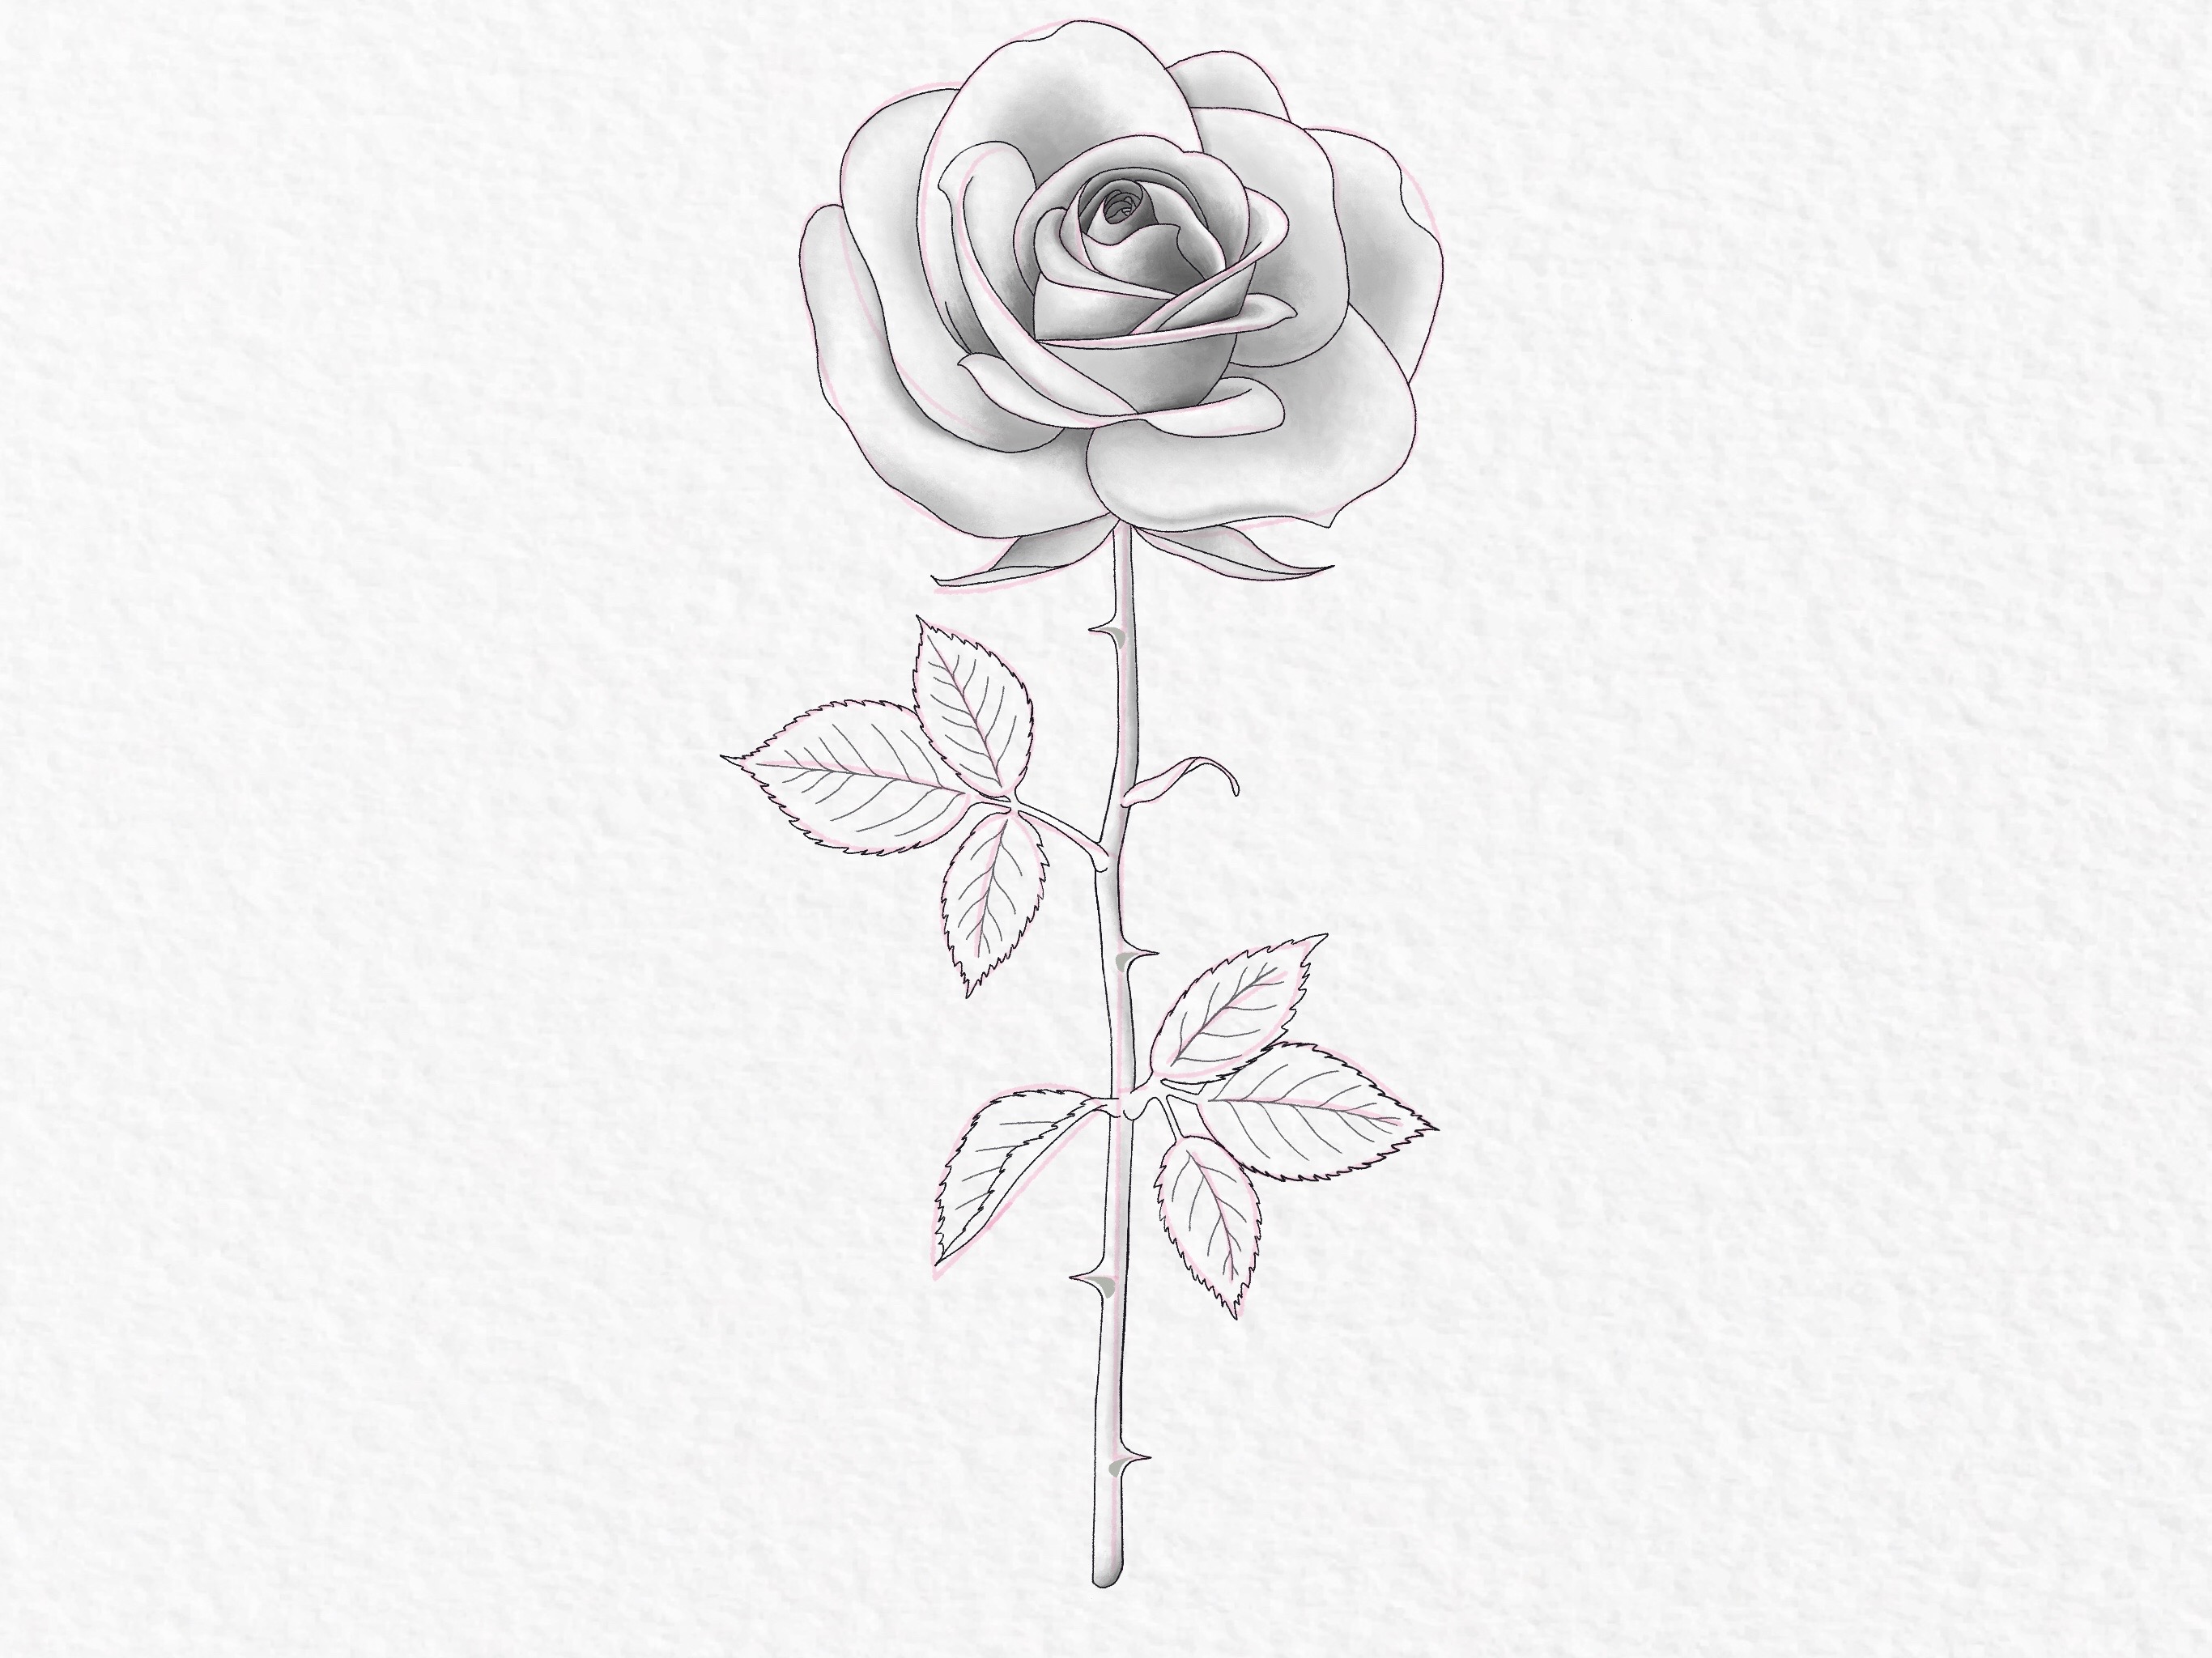 How to draw a rose - rose drawing made easy